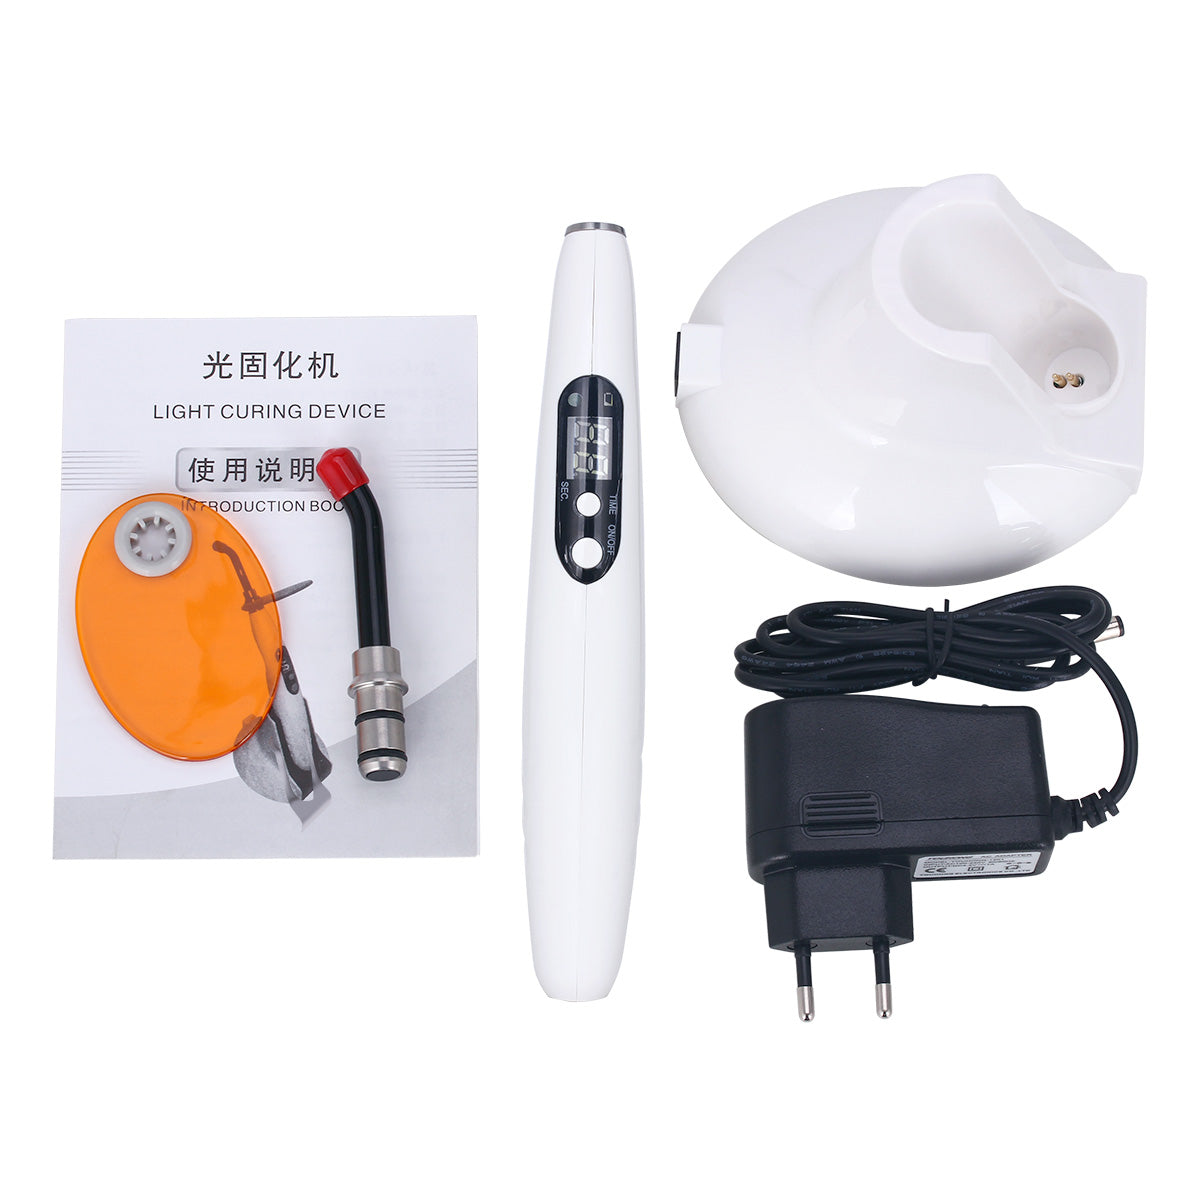 Dental LED Curing Light Lamp Wireless Cordless Resin Cure 1500mw 5W USA FDA